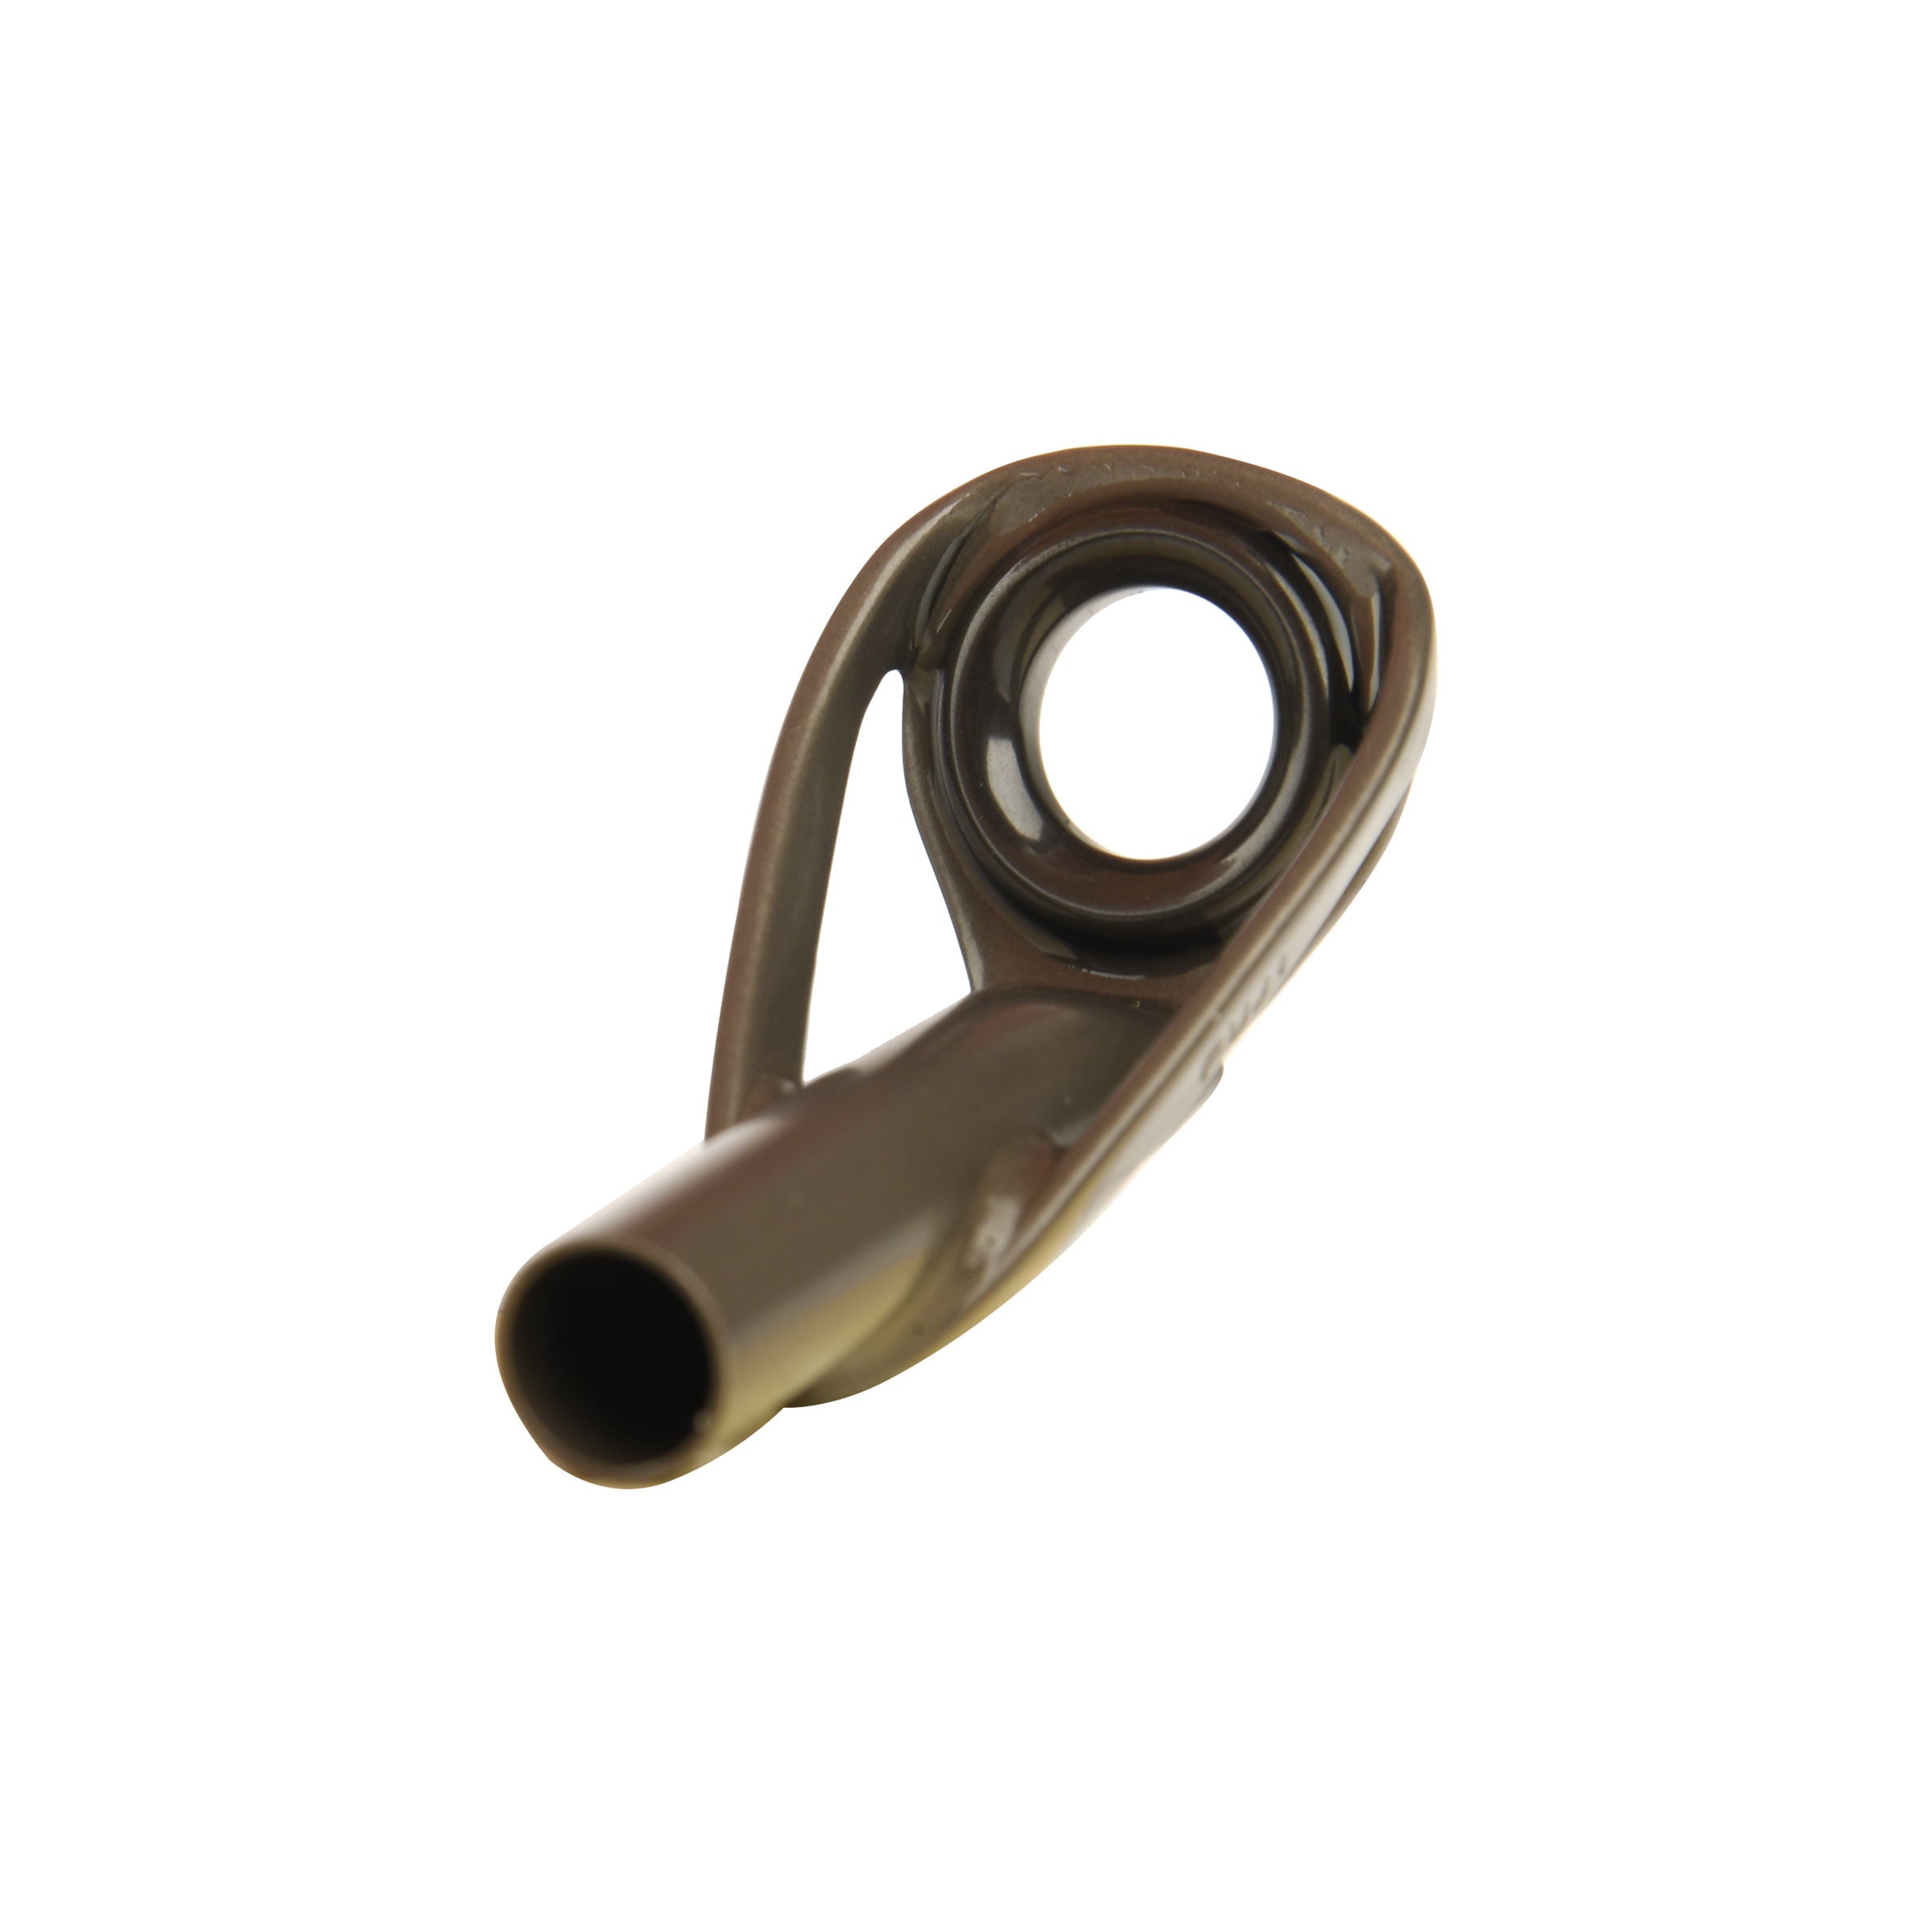 Buy Fuji rod guides and tops wholesale from Merrick Tackle. Catalog online.